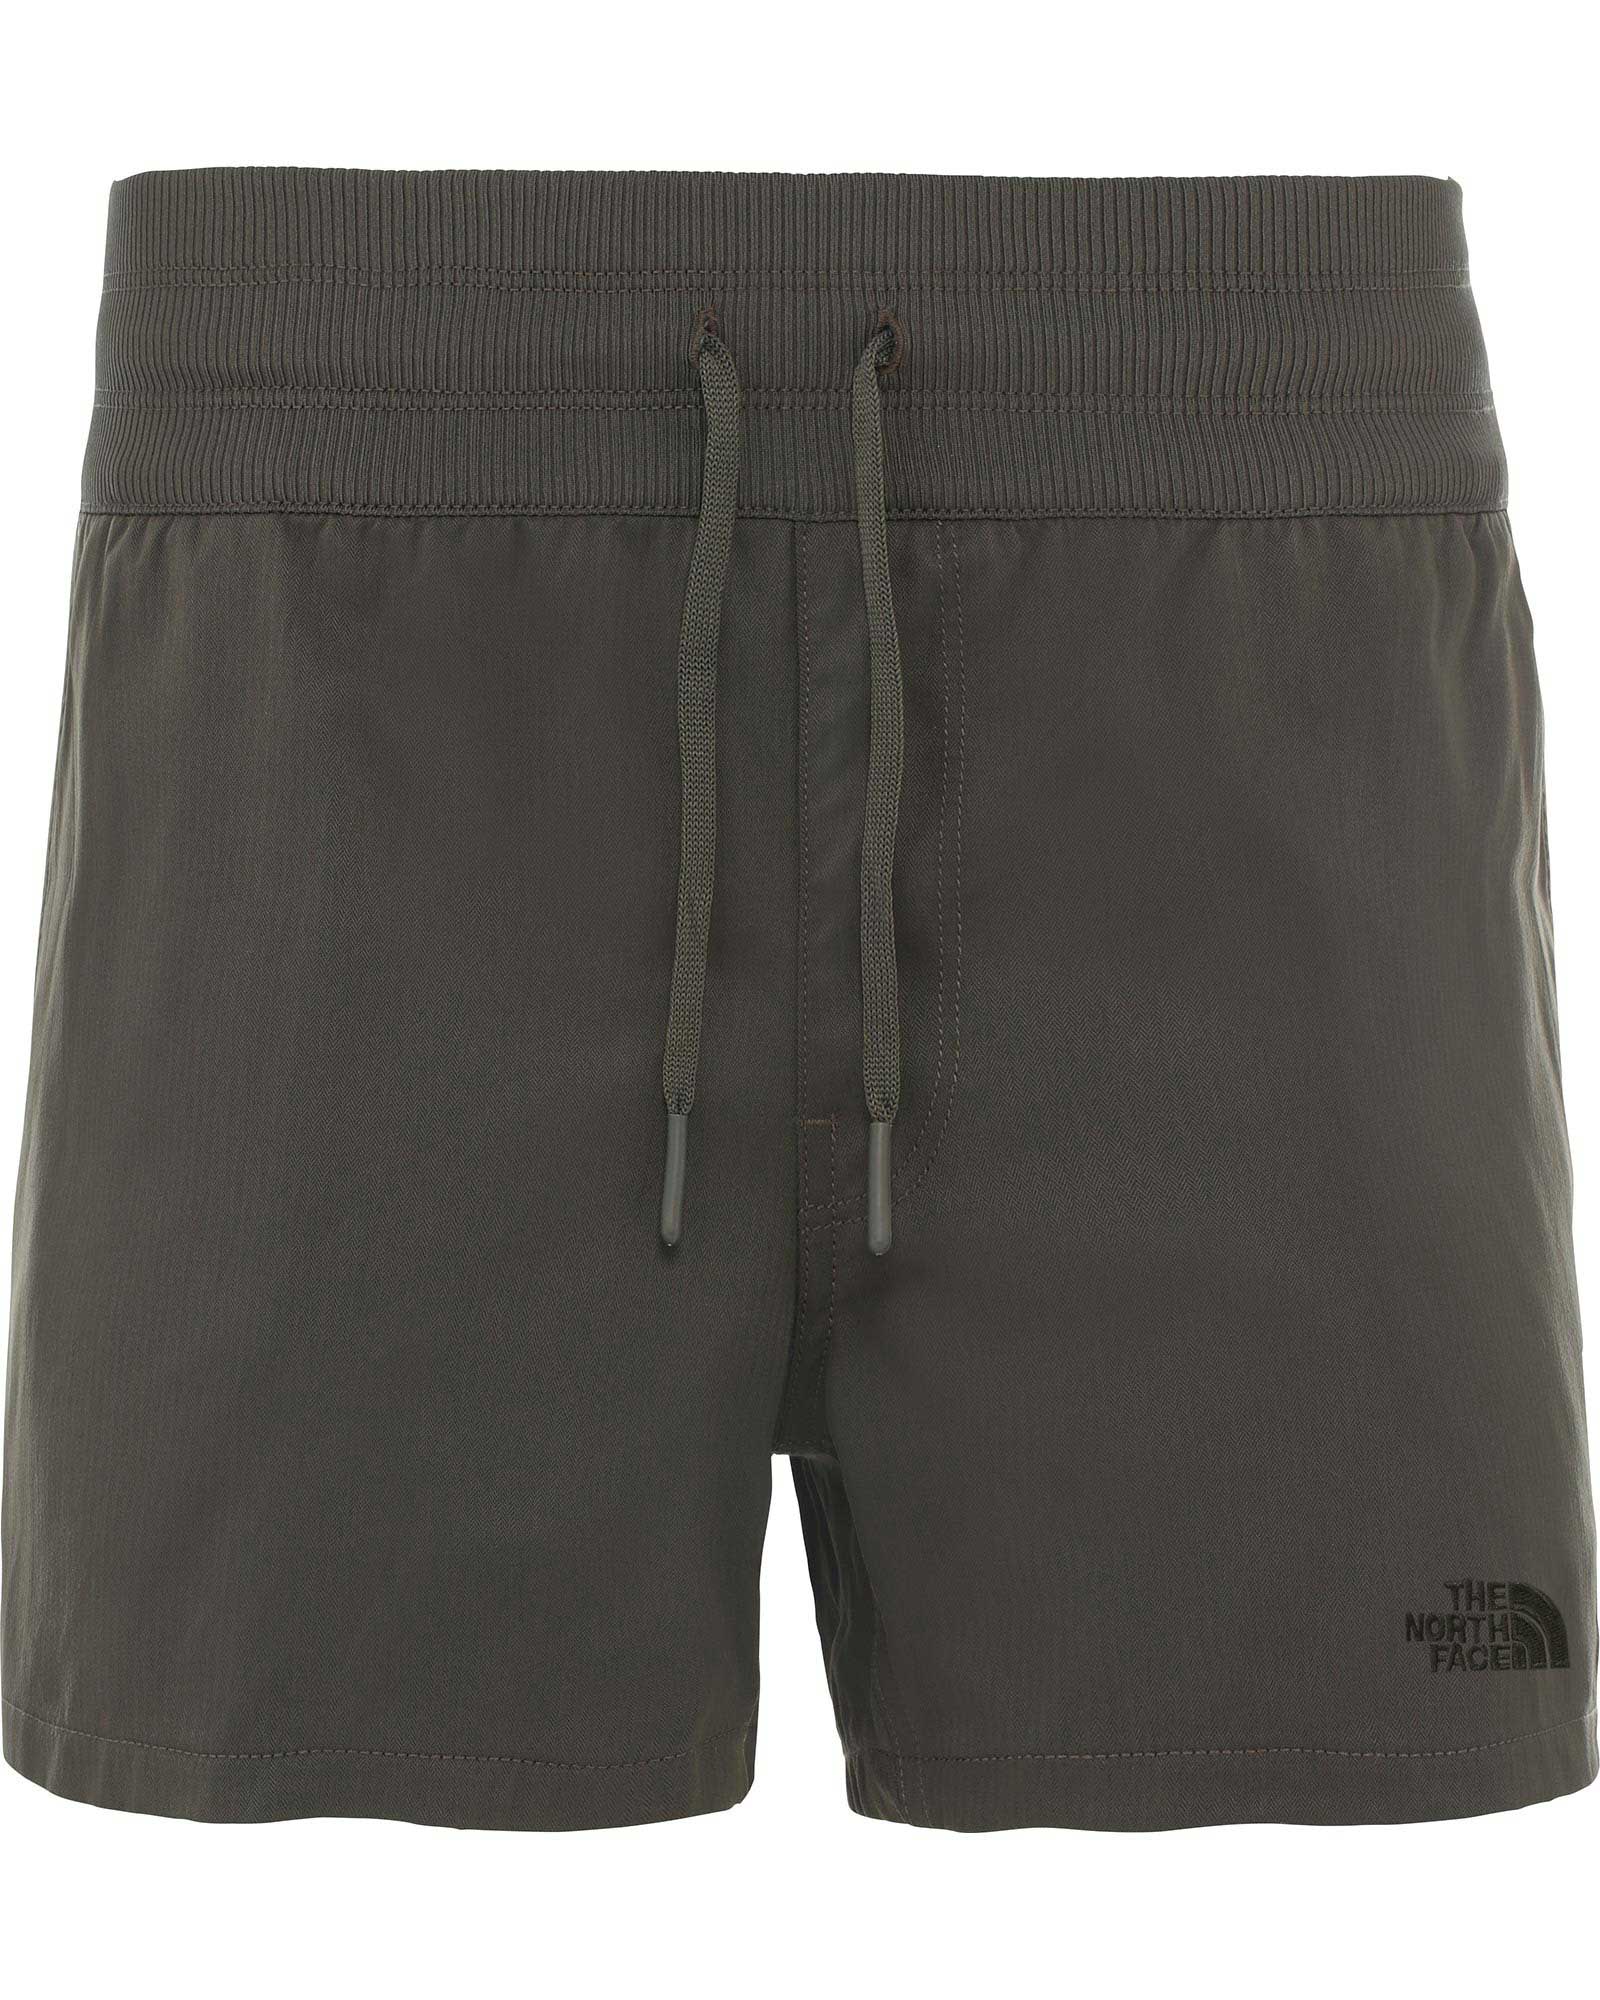 The North Face Aphrodite Womens Shorts